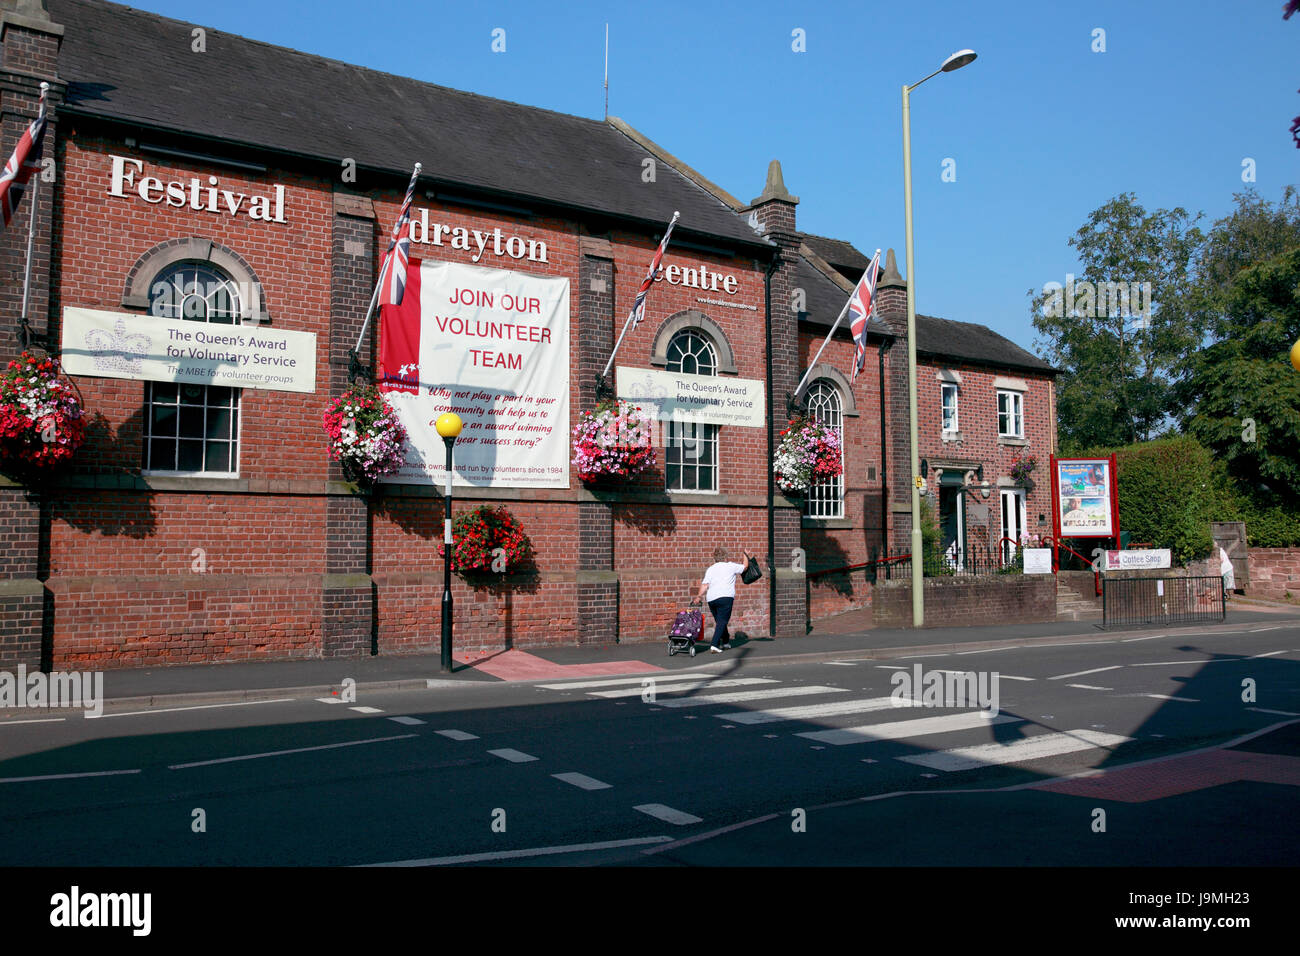 Festival Drayton Centre, a community arts and cinema centre run largely by volunteers in Market Drayton, Shropshire Stock Photo